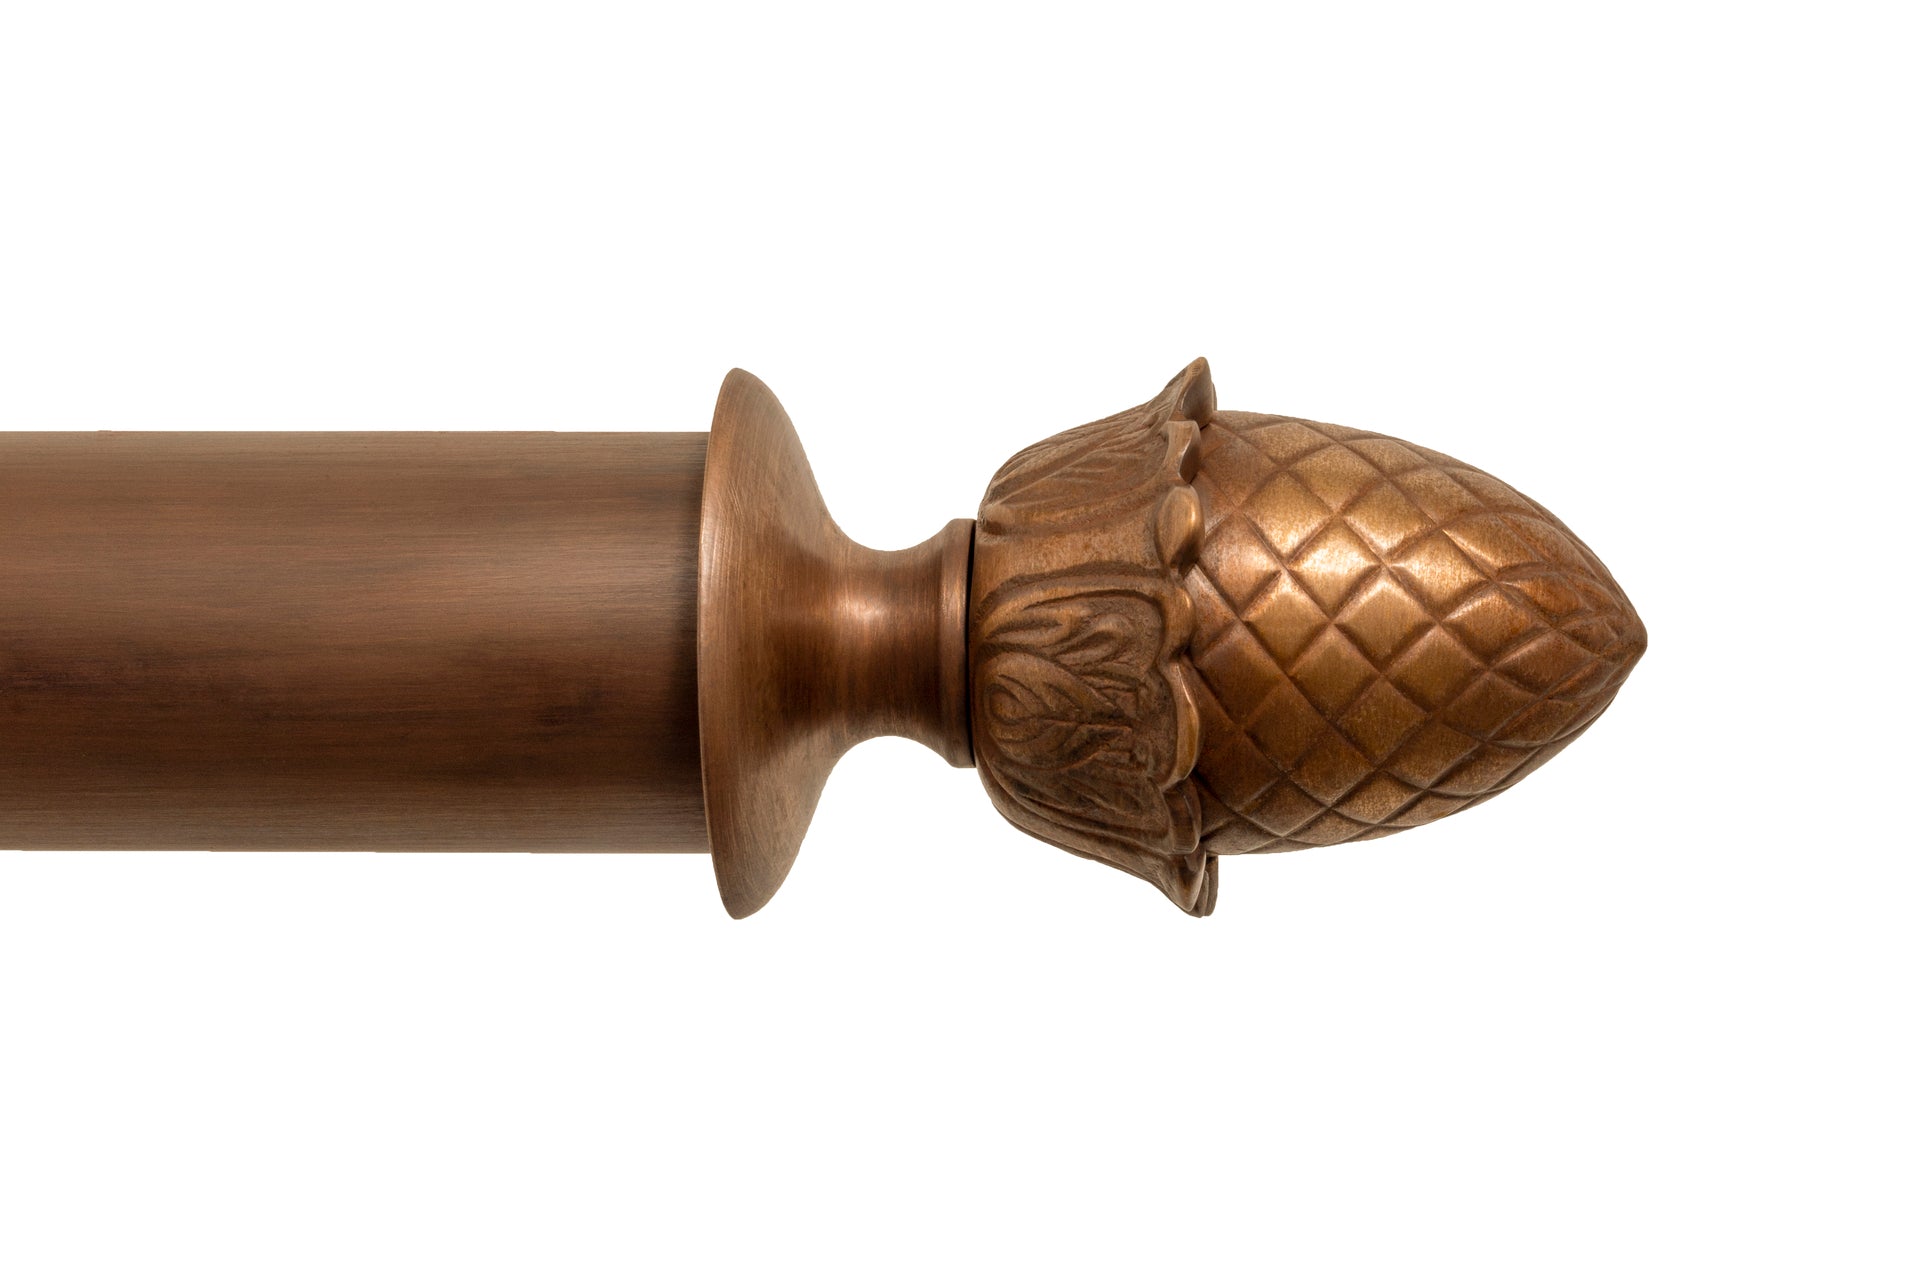 Tillys Classic Pineapple Finial Curtain Pole Set in Antique Brass